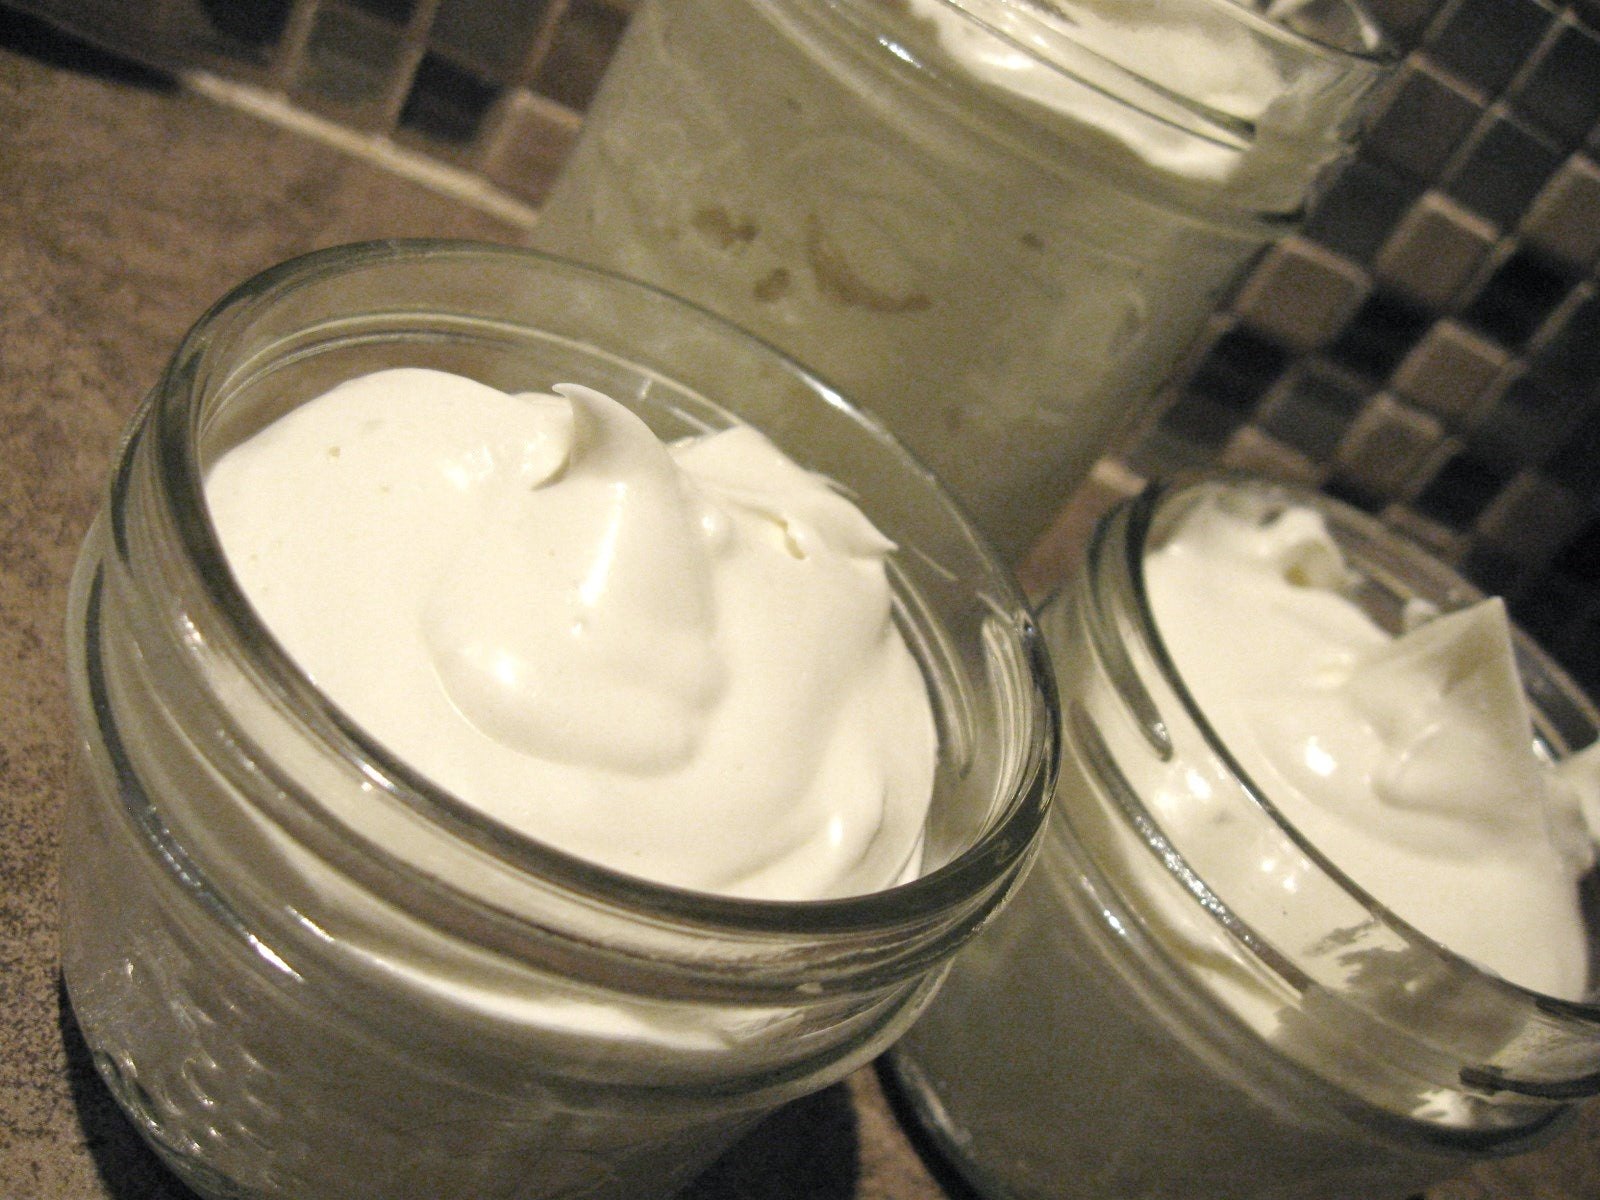 Make your body butter with simple and natural products